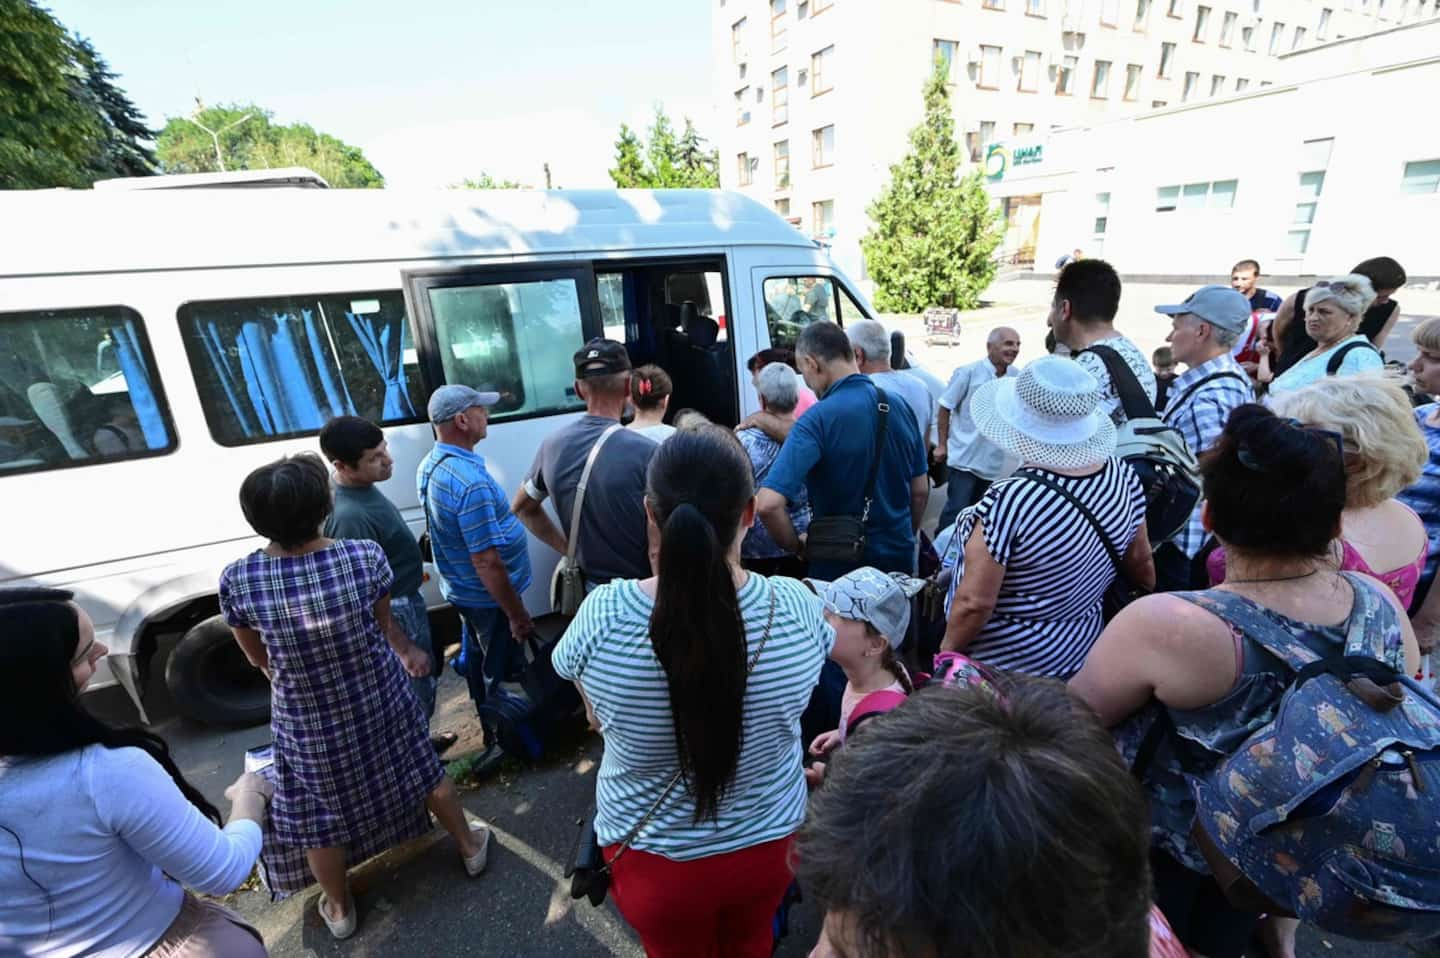 Ukraine: continuation of the evacuation of Sloviansk in the face of Russian advances